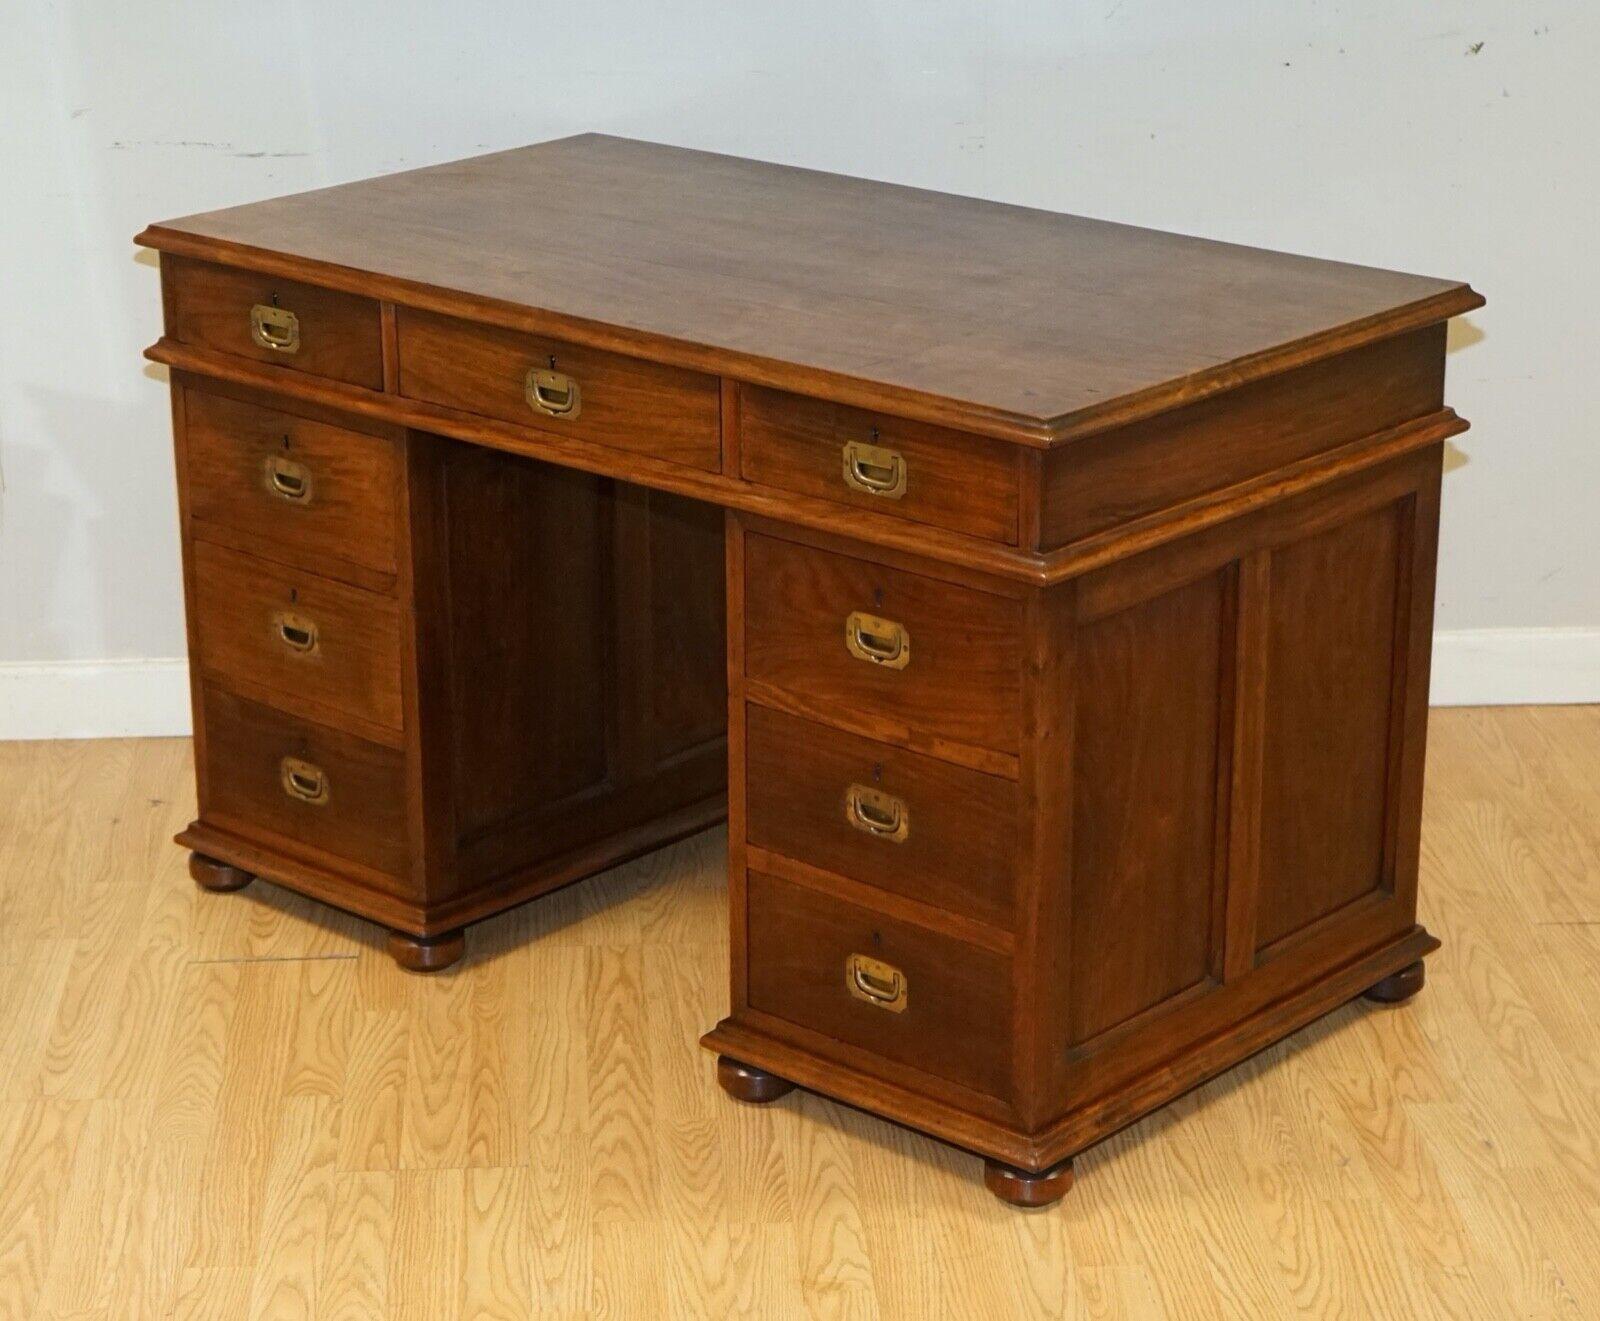 The Antique Rare Victoria Regina Military Campaign Pedestal Desk, circa 1880, is a truly exceptional piece of furniture that marries style, functionality, and historical significance. 

Crafted during the reign of Queen Victoria and inspired by